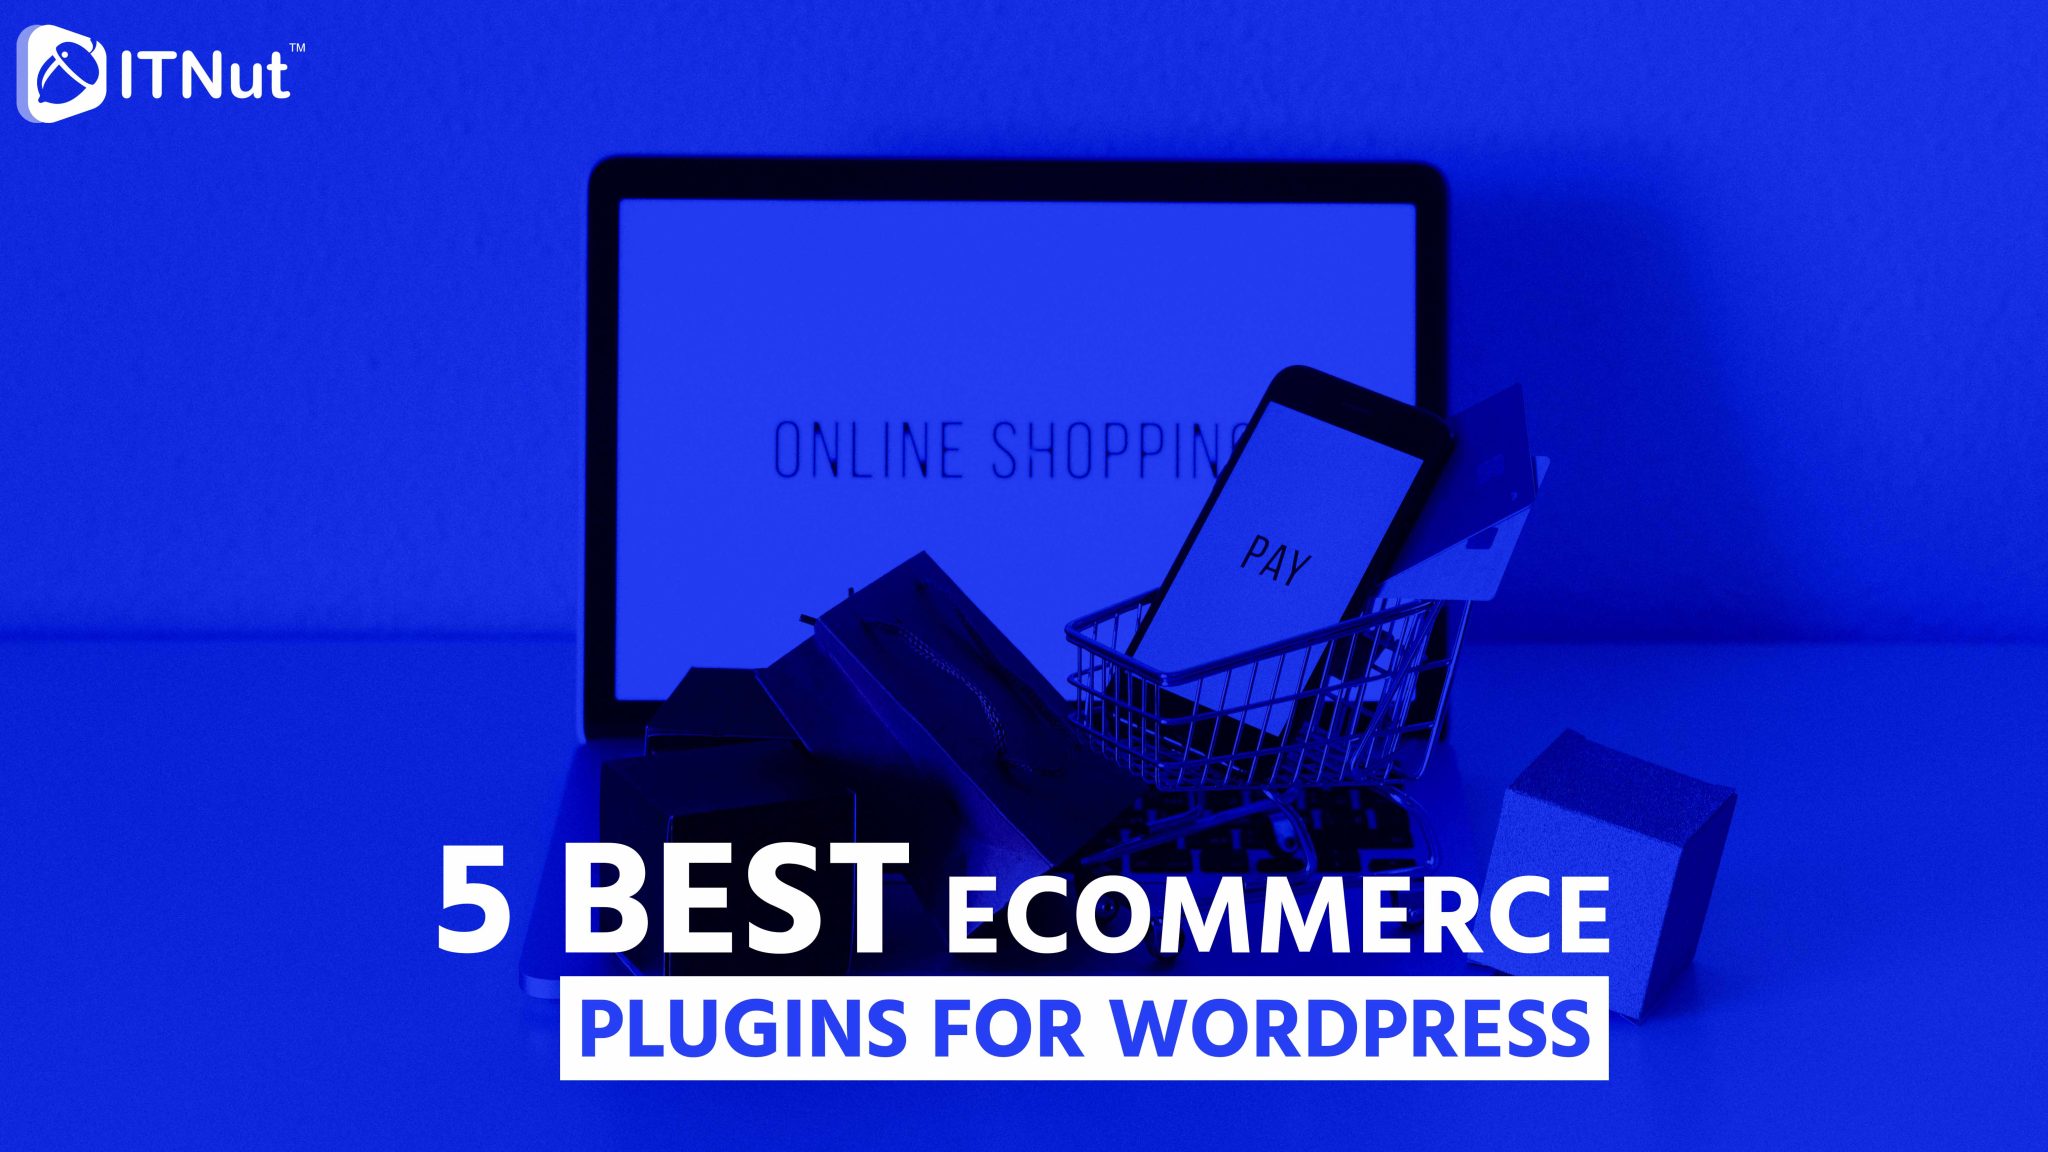 You are currently viewing 5 Best eCommerce Plugins for WordPress